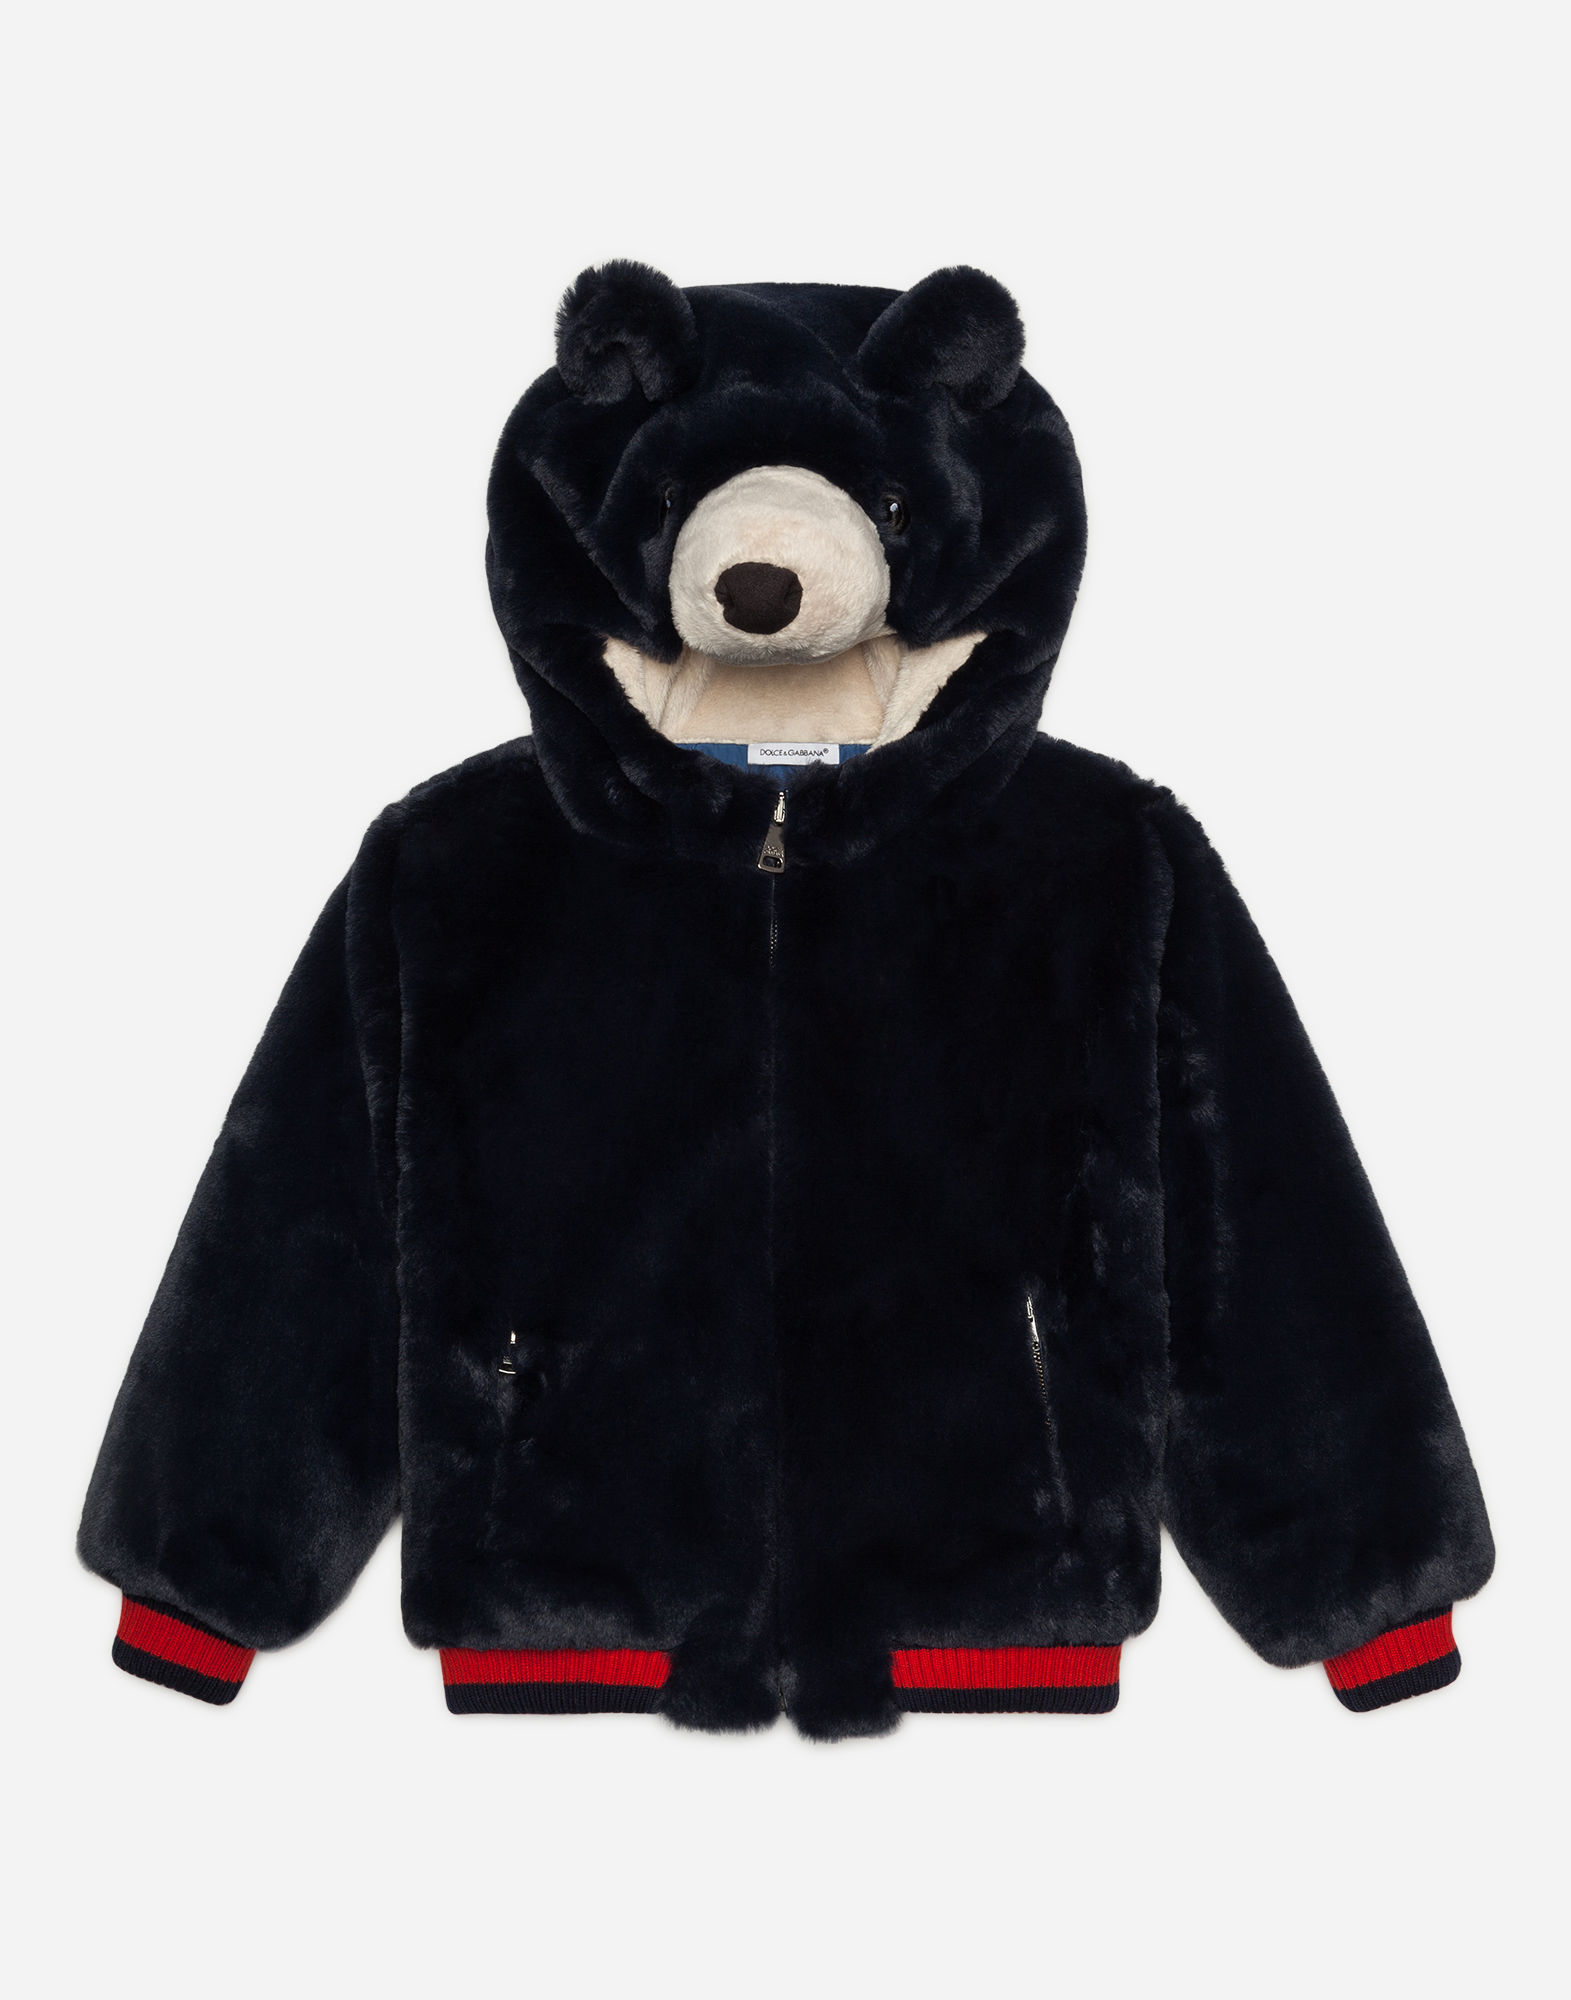 gender-neutral-kids-coat-dsquared 9 Gender-Neutral Winter Coats for Kids All Your Little Ones Can Share